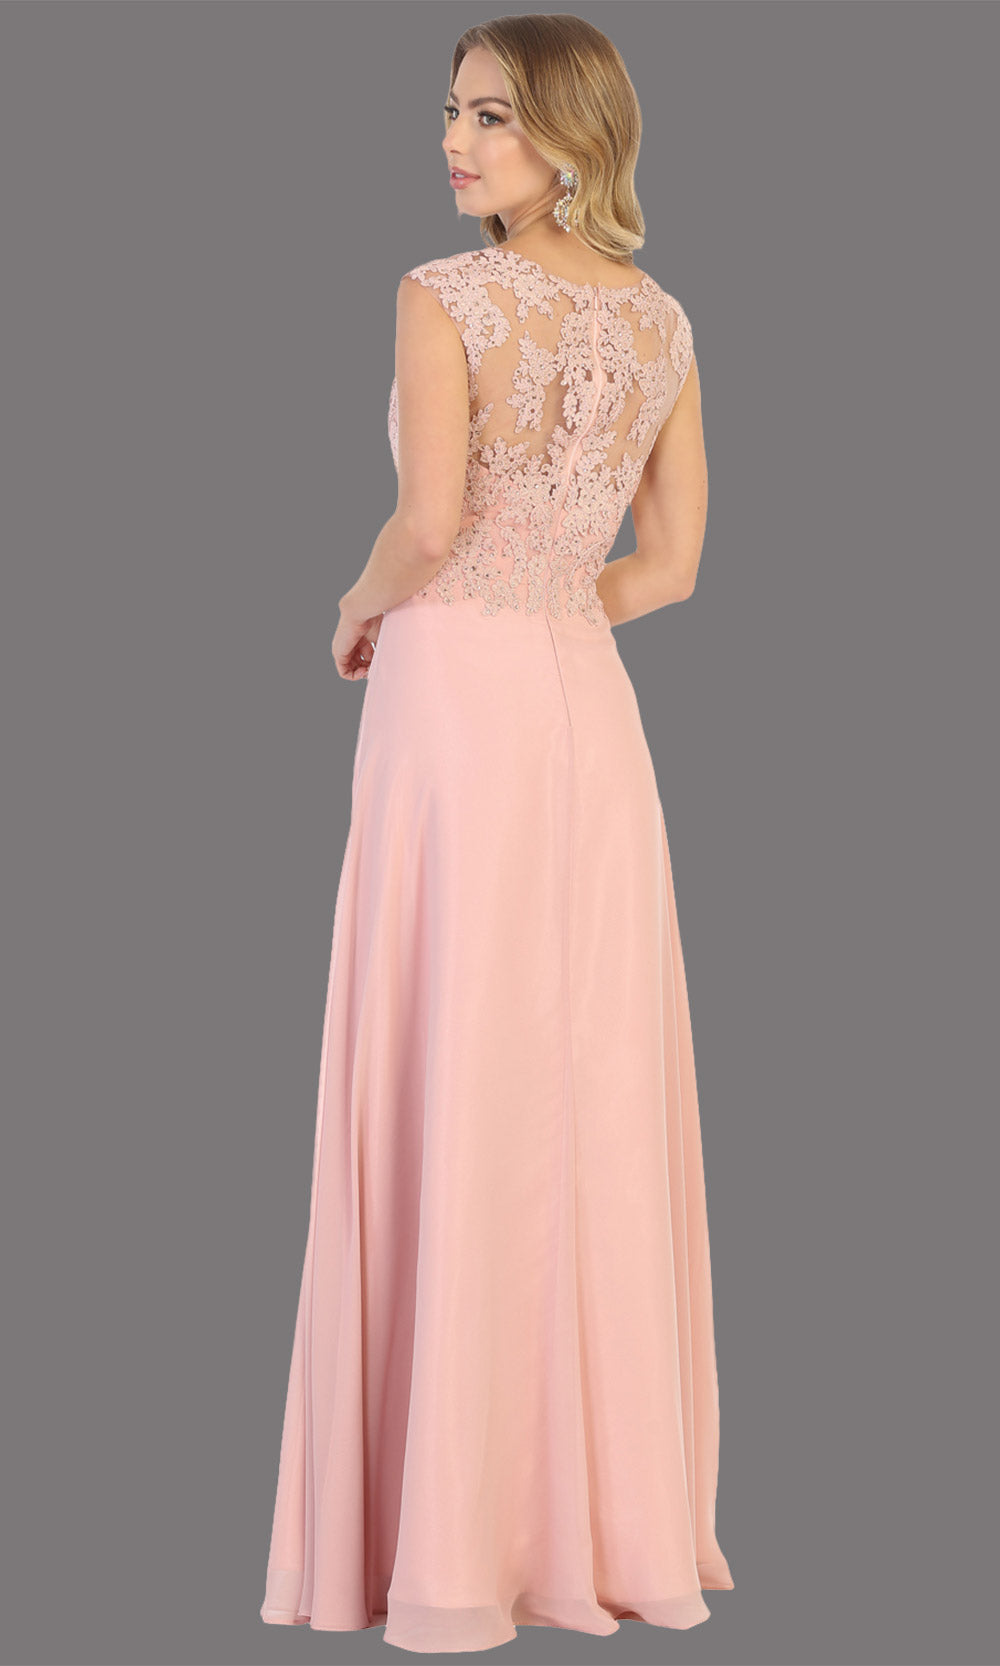 Mayqueen MQ1725 long dusty rose flowy dress with high neck & high back. This light pink dress is perfect for bridesmaid dresses, simple wedding guest dress, prom dress, gala, black tie wedding. Plus sizes are available, evening party dress-b.jpg